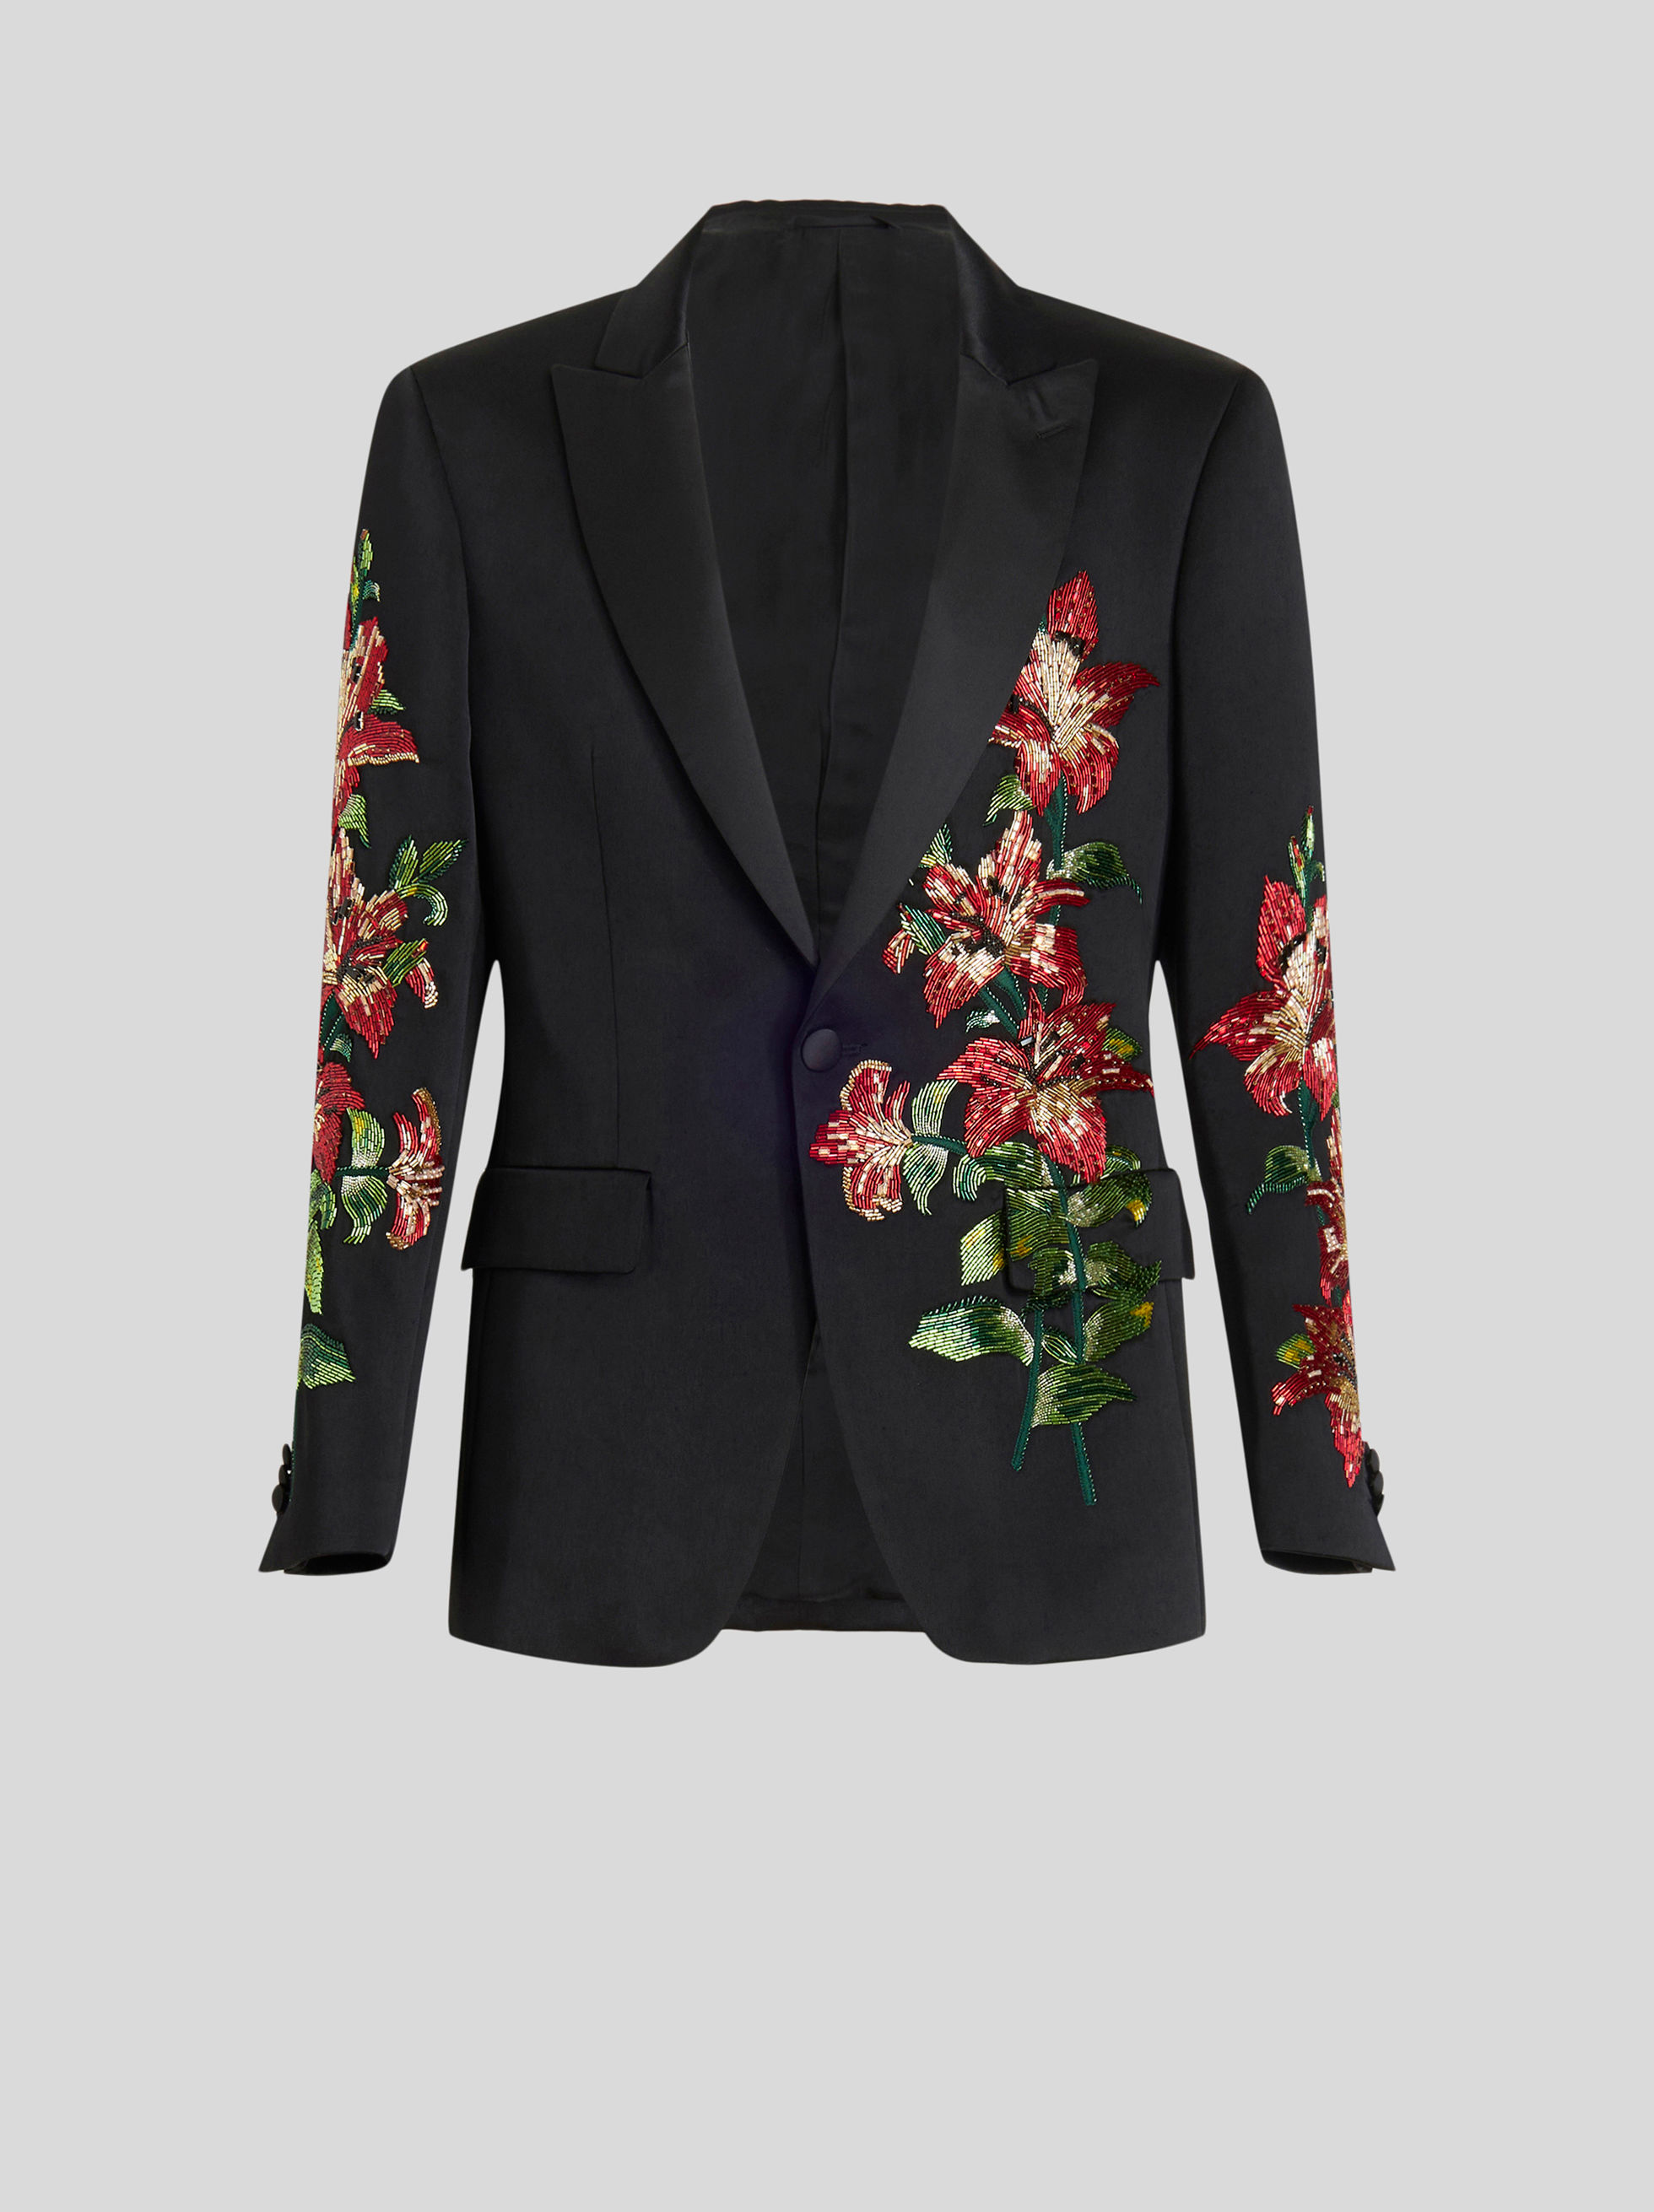 TAILORED FLORAL EMBROIDERY JACKET